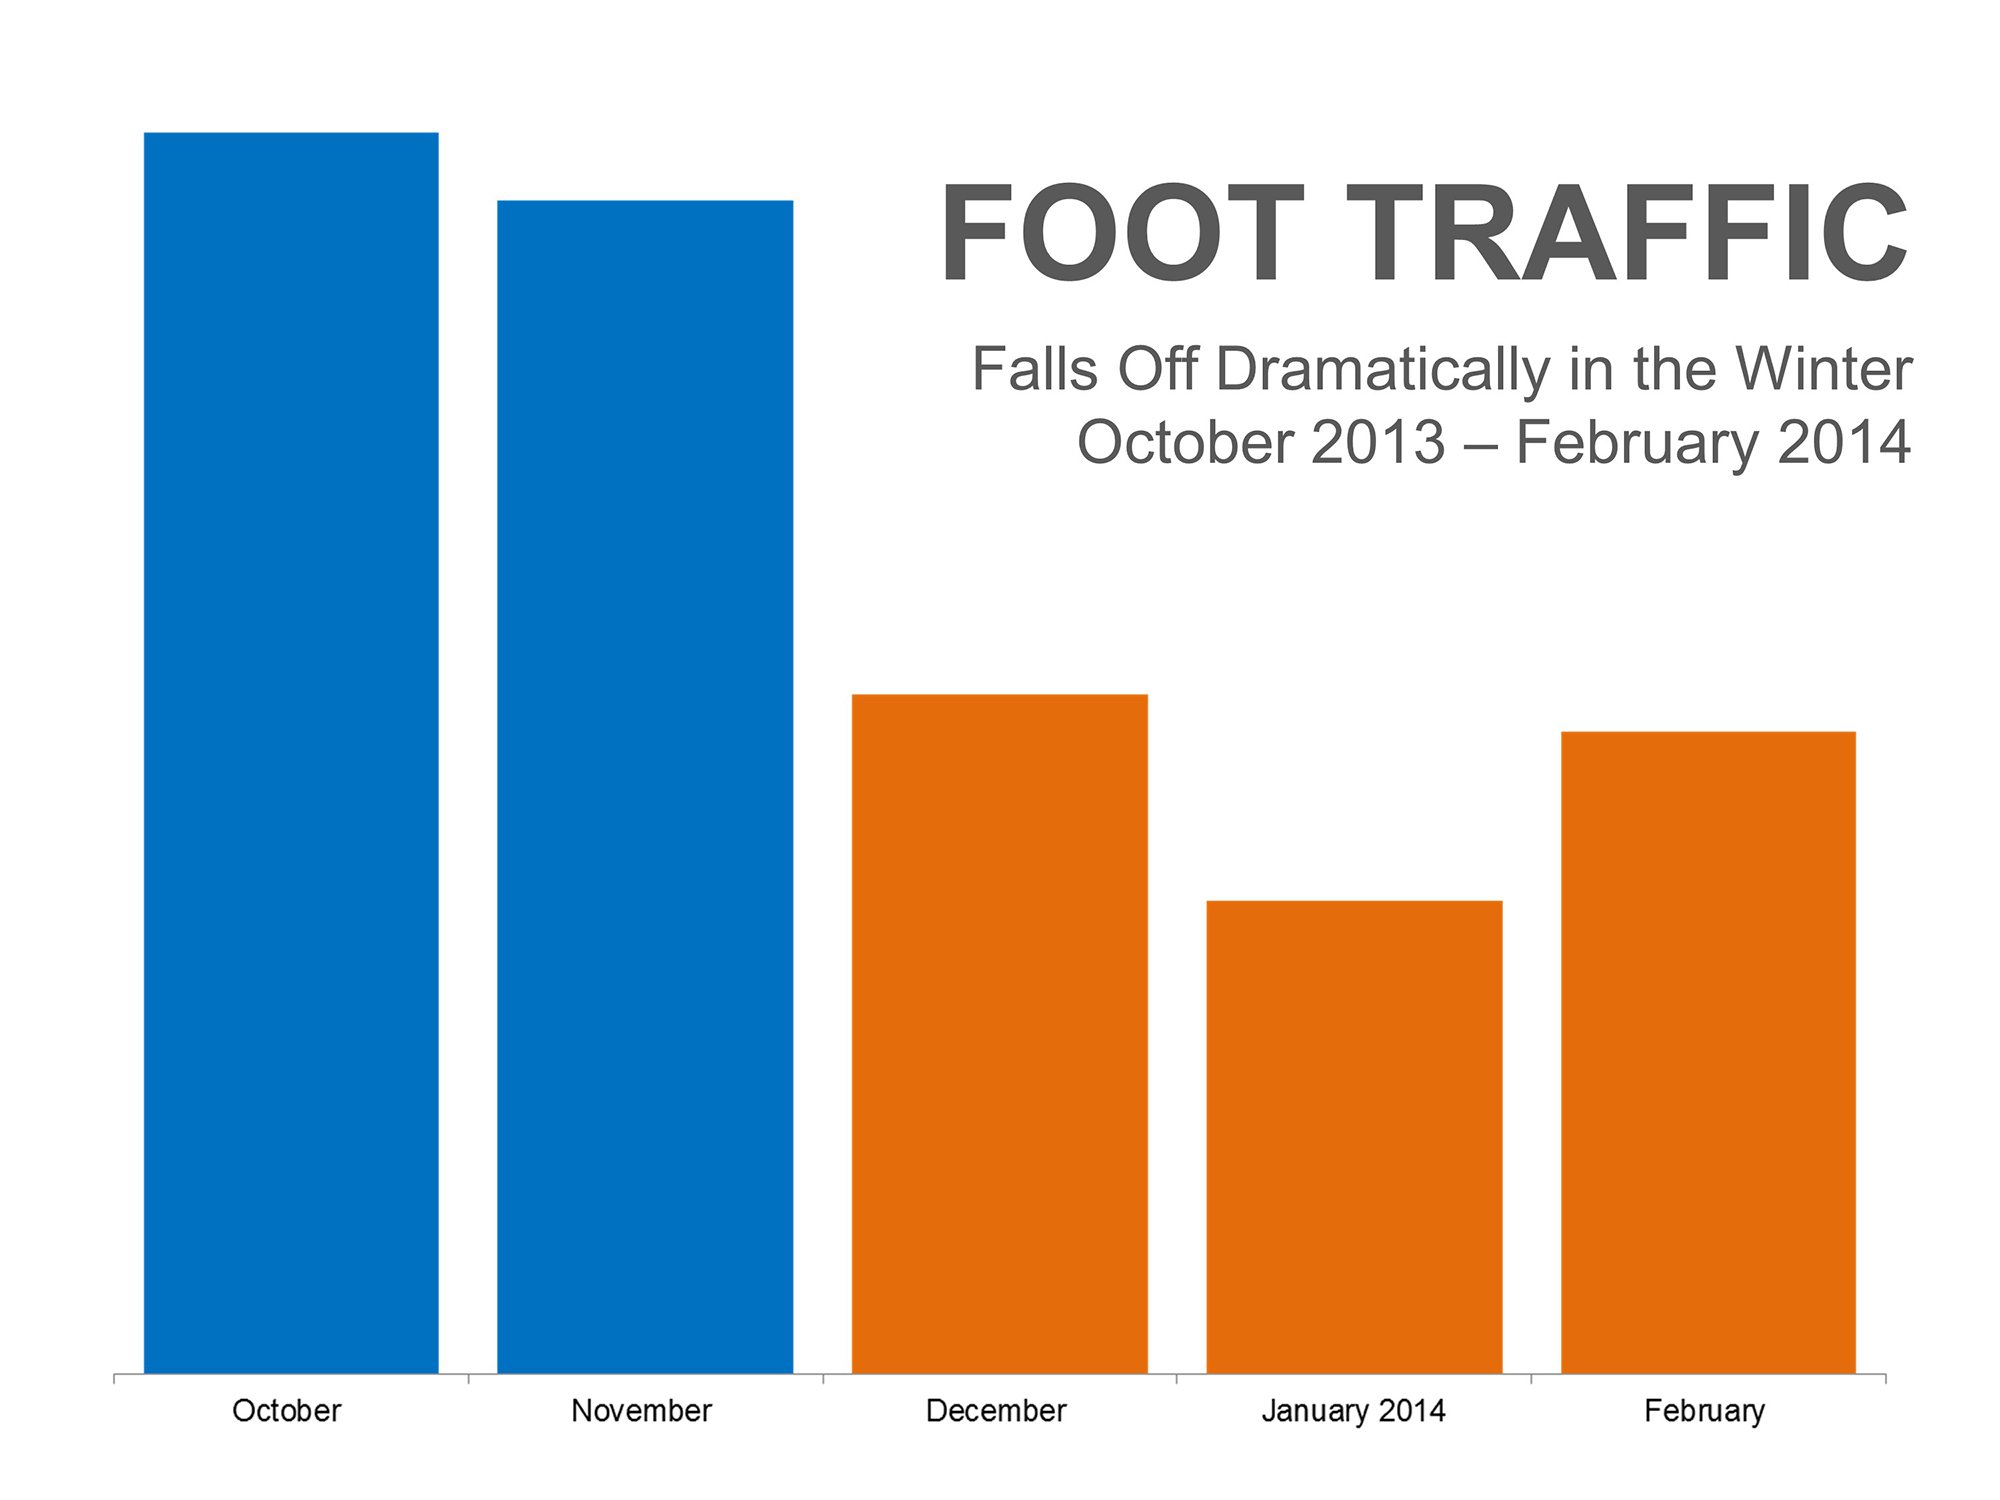 Foot Traffic To Decline in Winter Months | Simplifying The Market